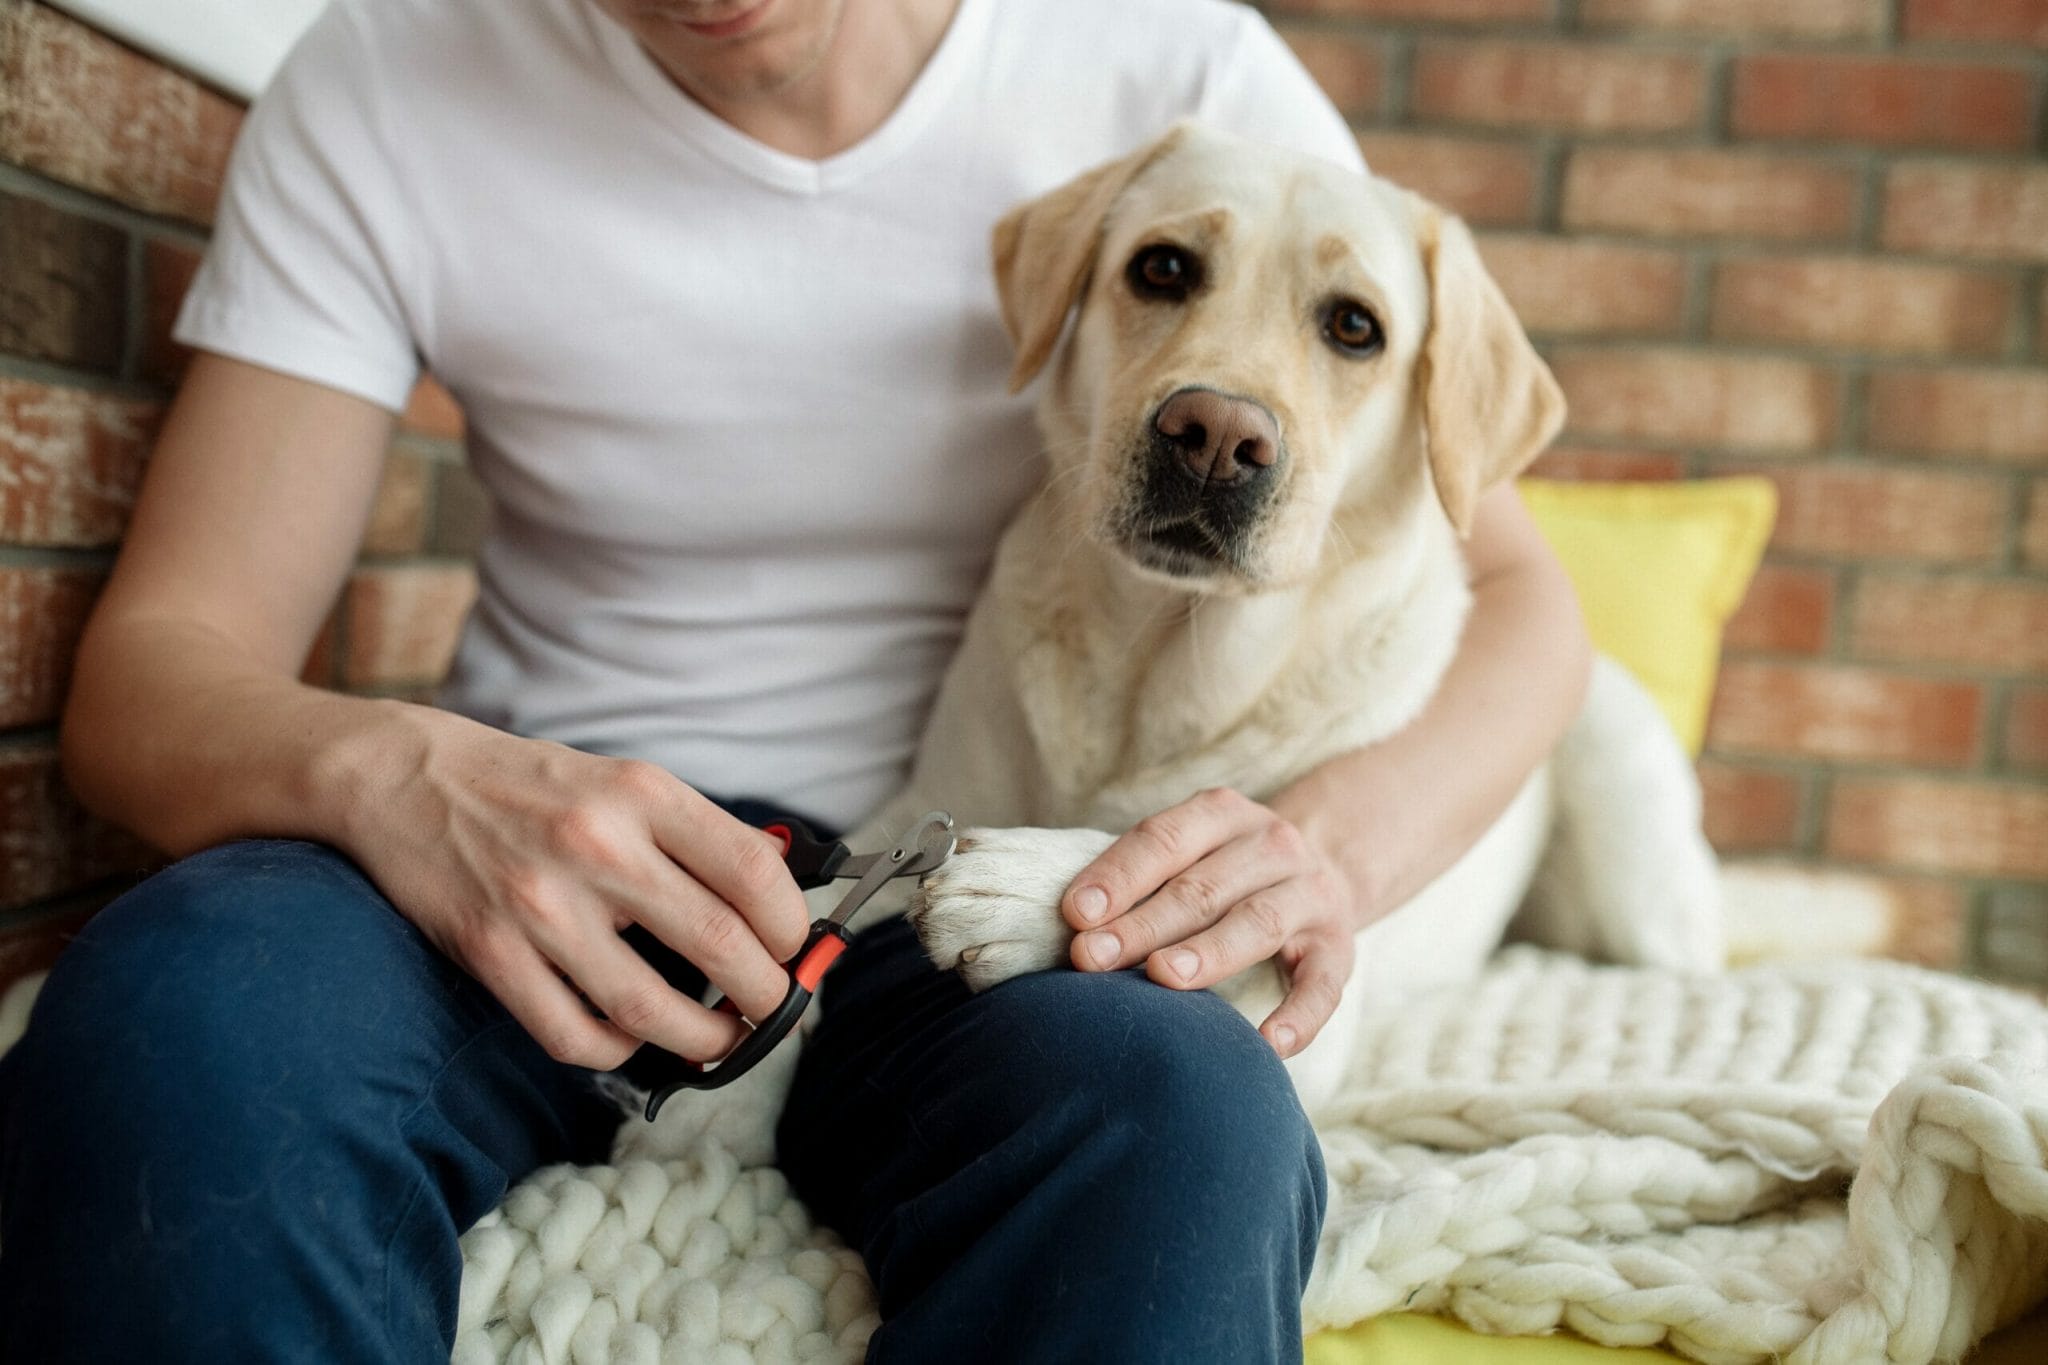 Trim your dog's nails